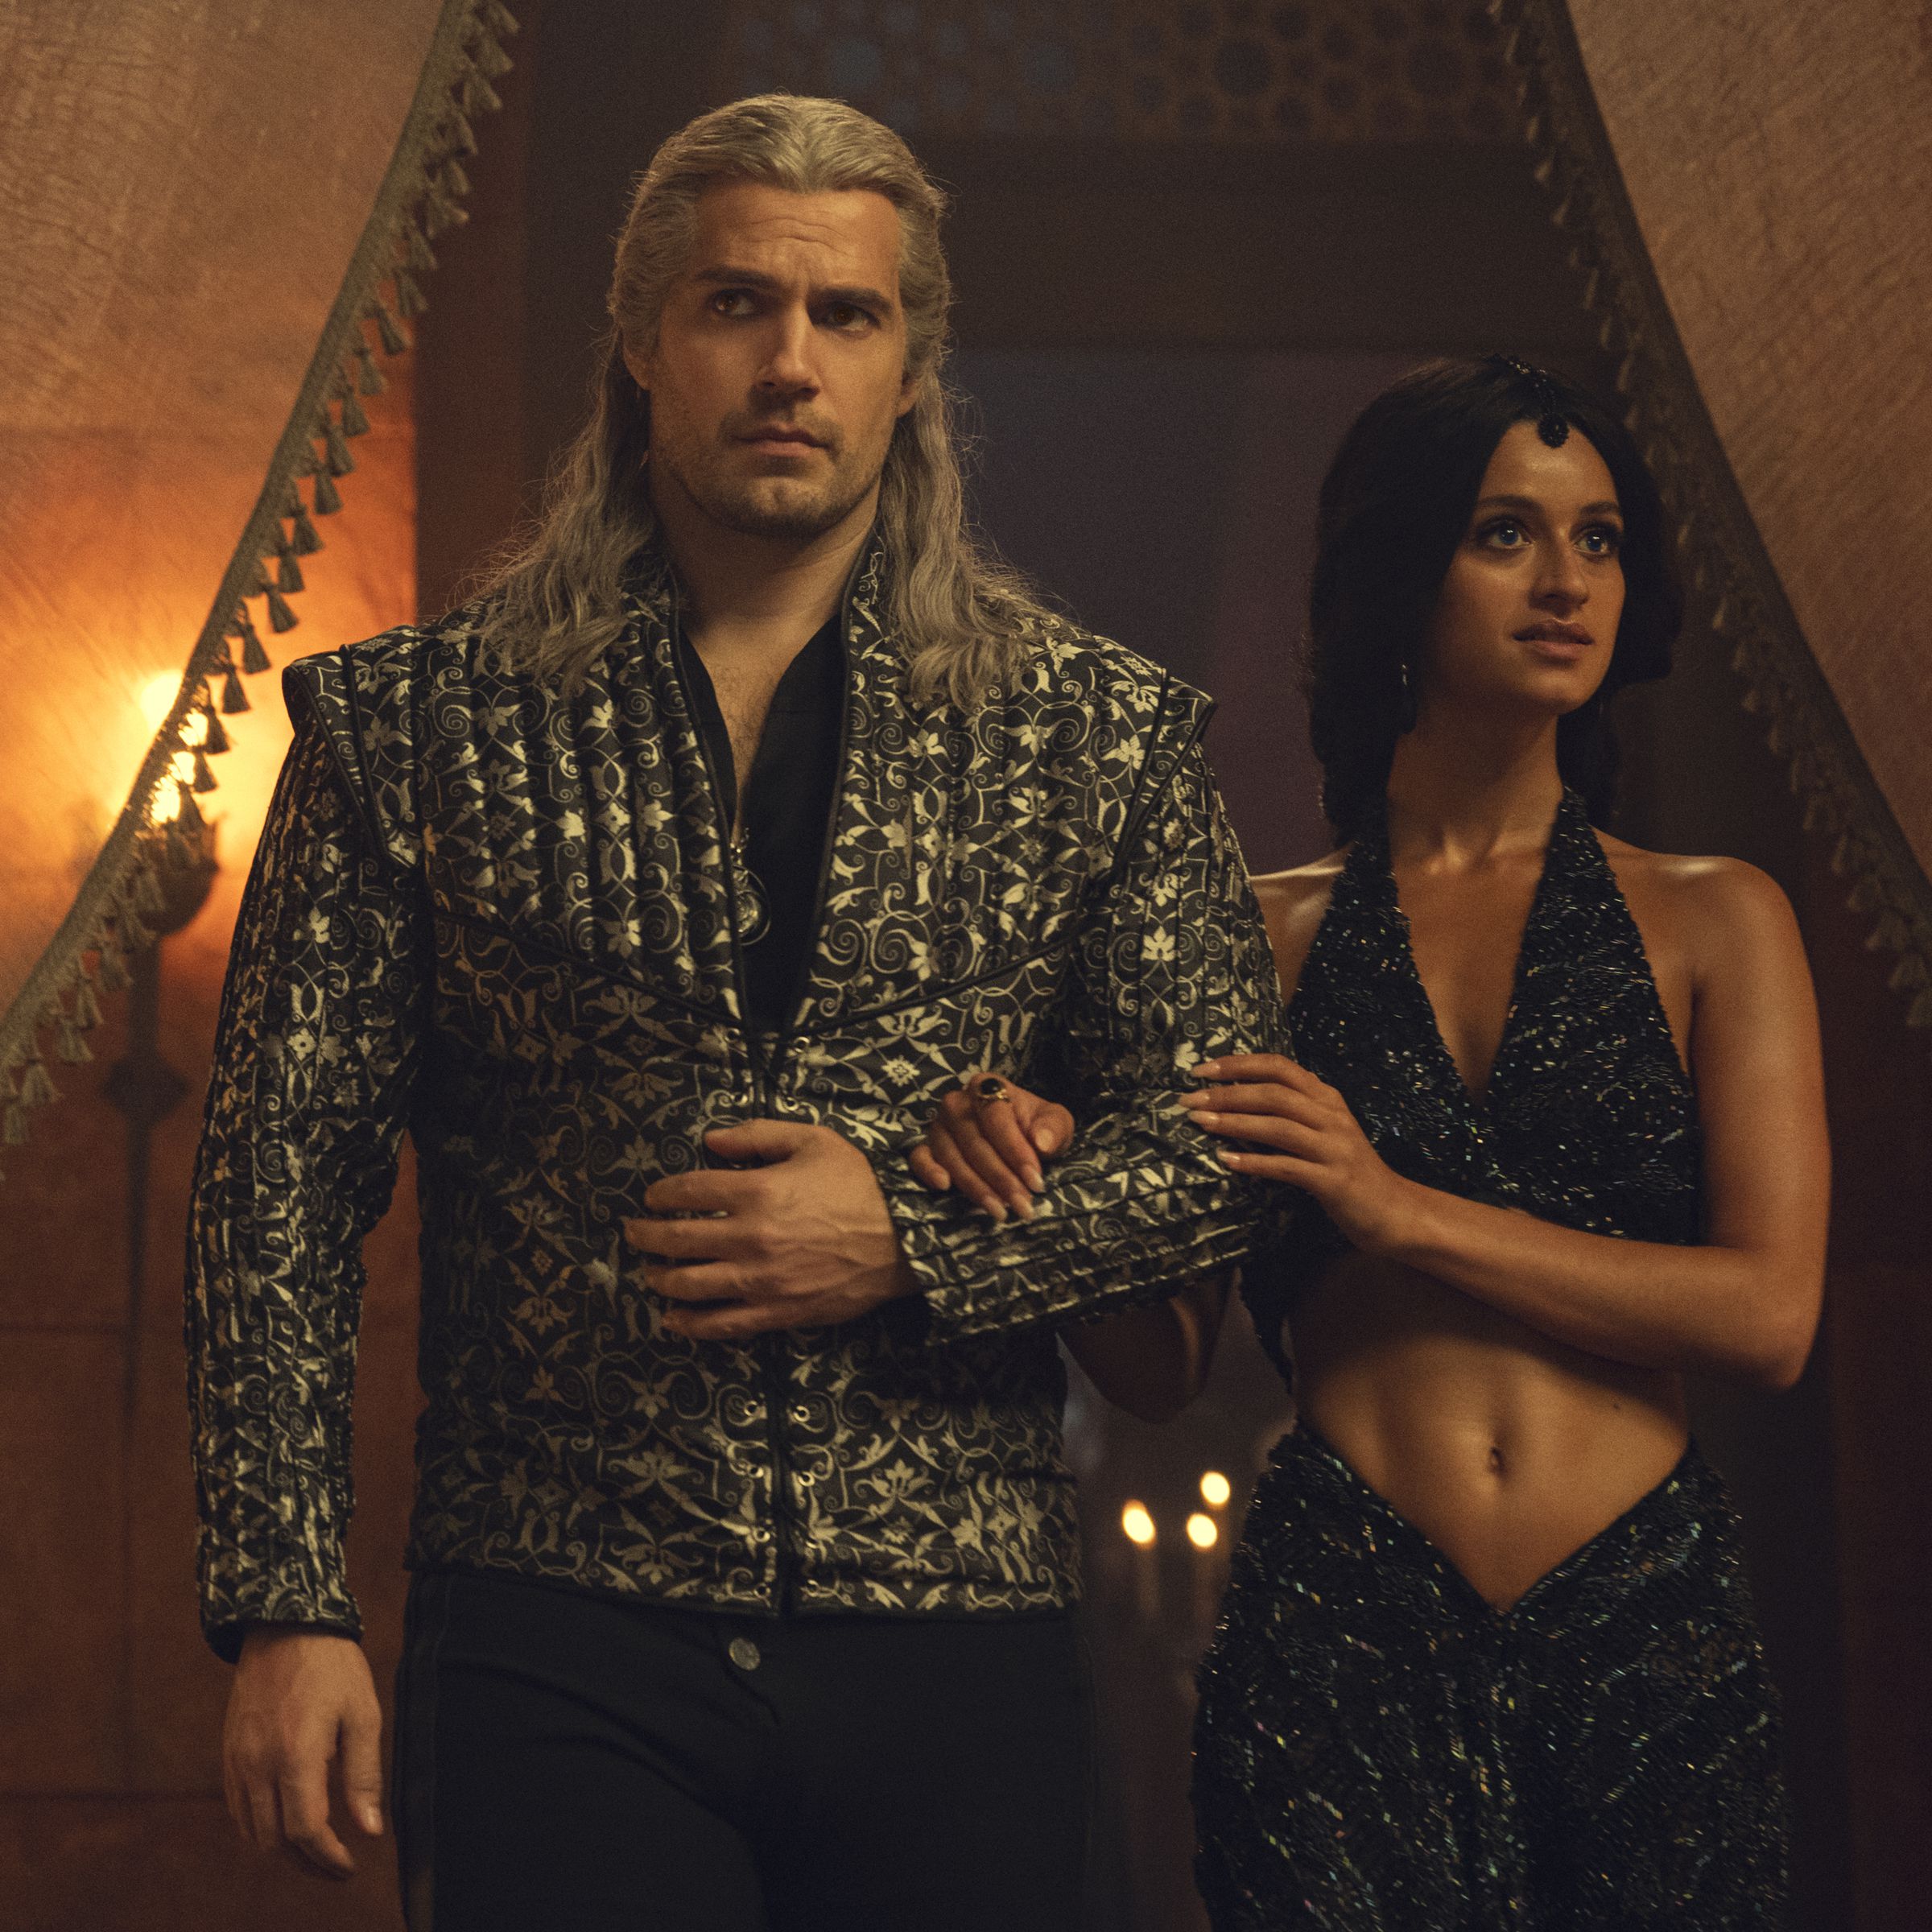 Henry Cavill and Anya Chalotra in The Witcher.